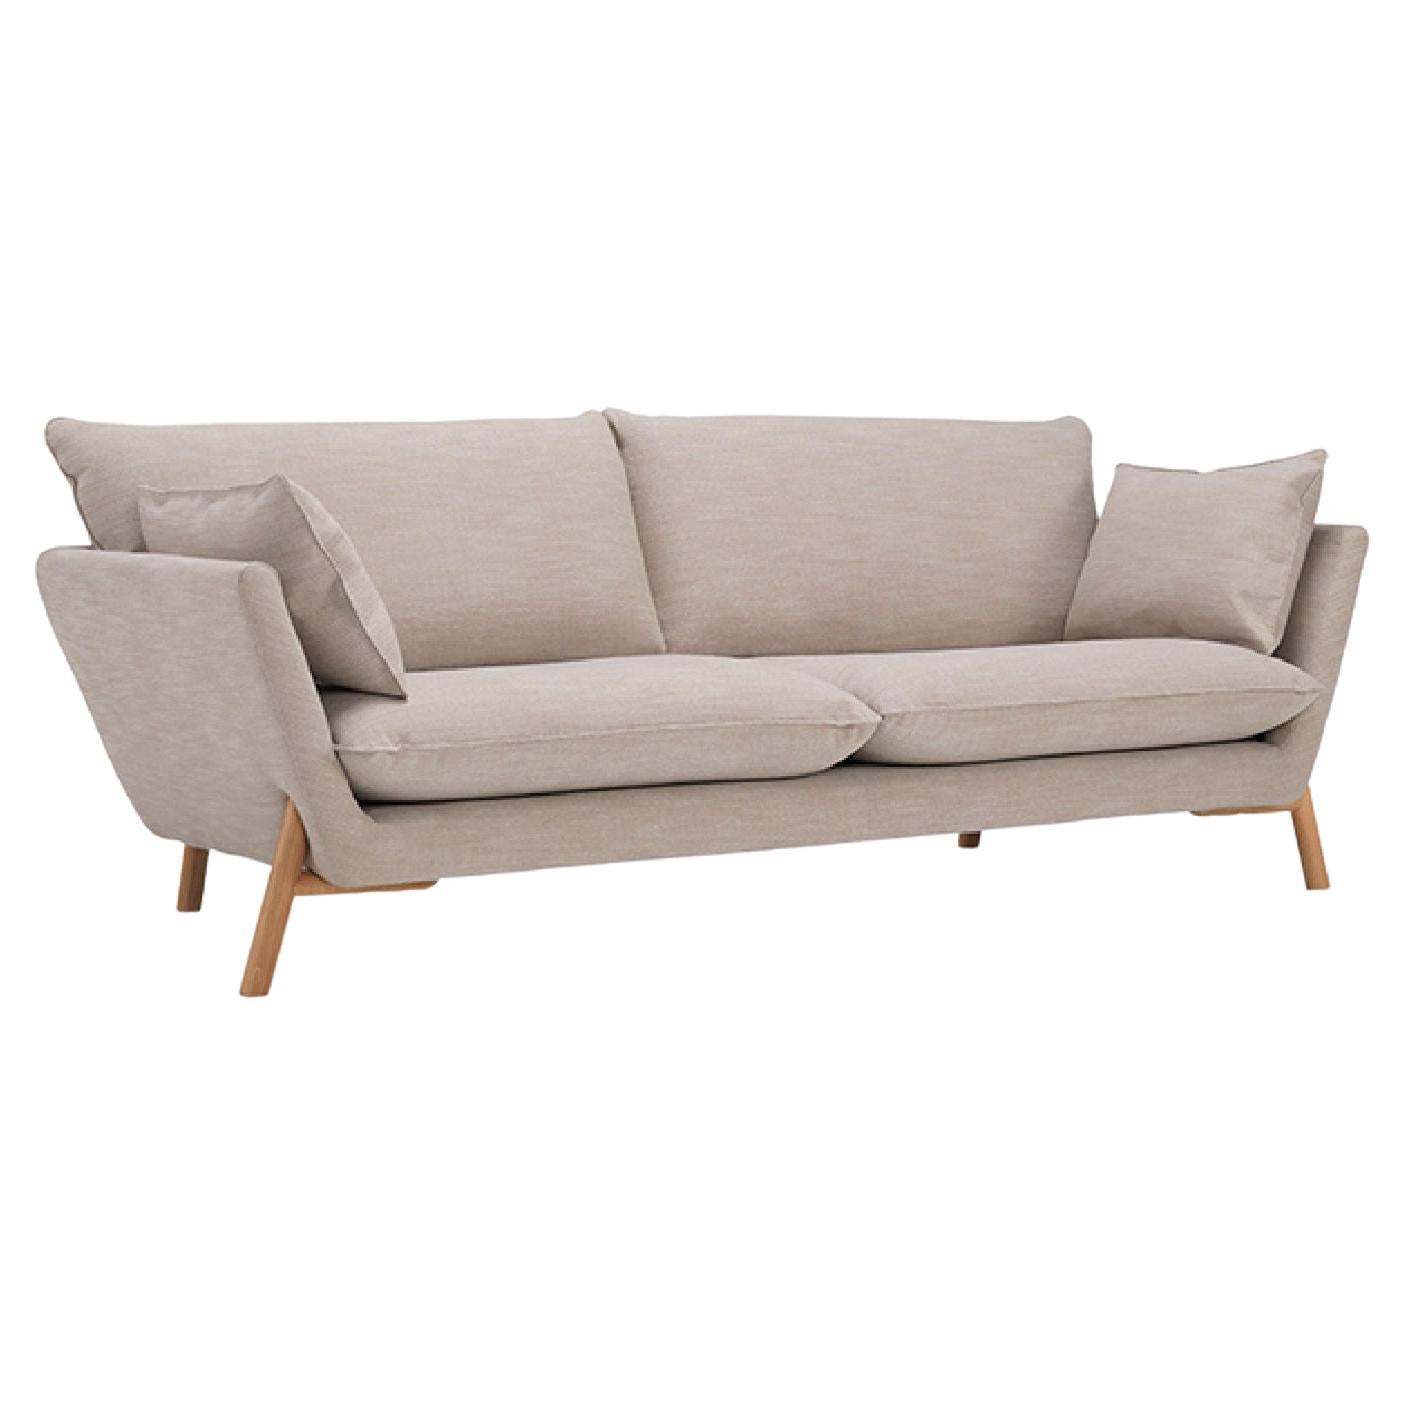 Hayche Nave 2 Seater Sofa - Brown, UK, Made to Order For Sale